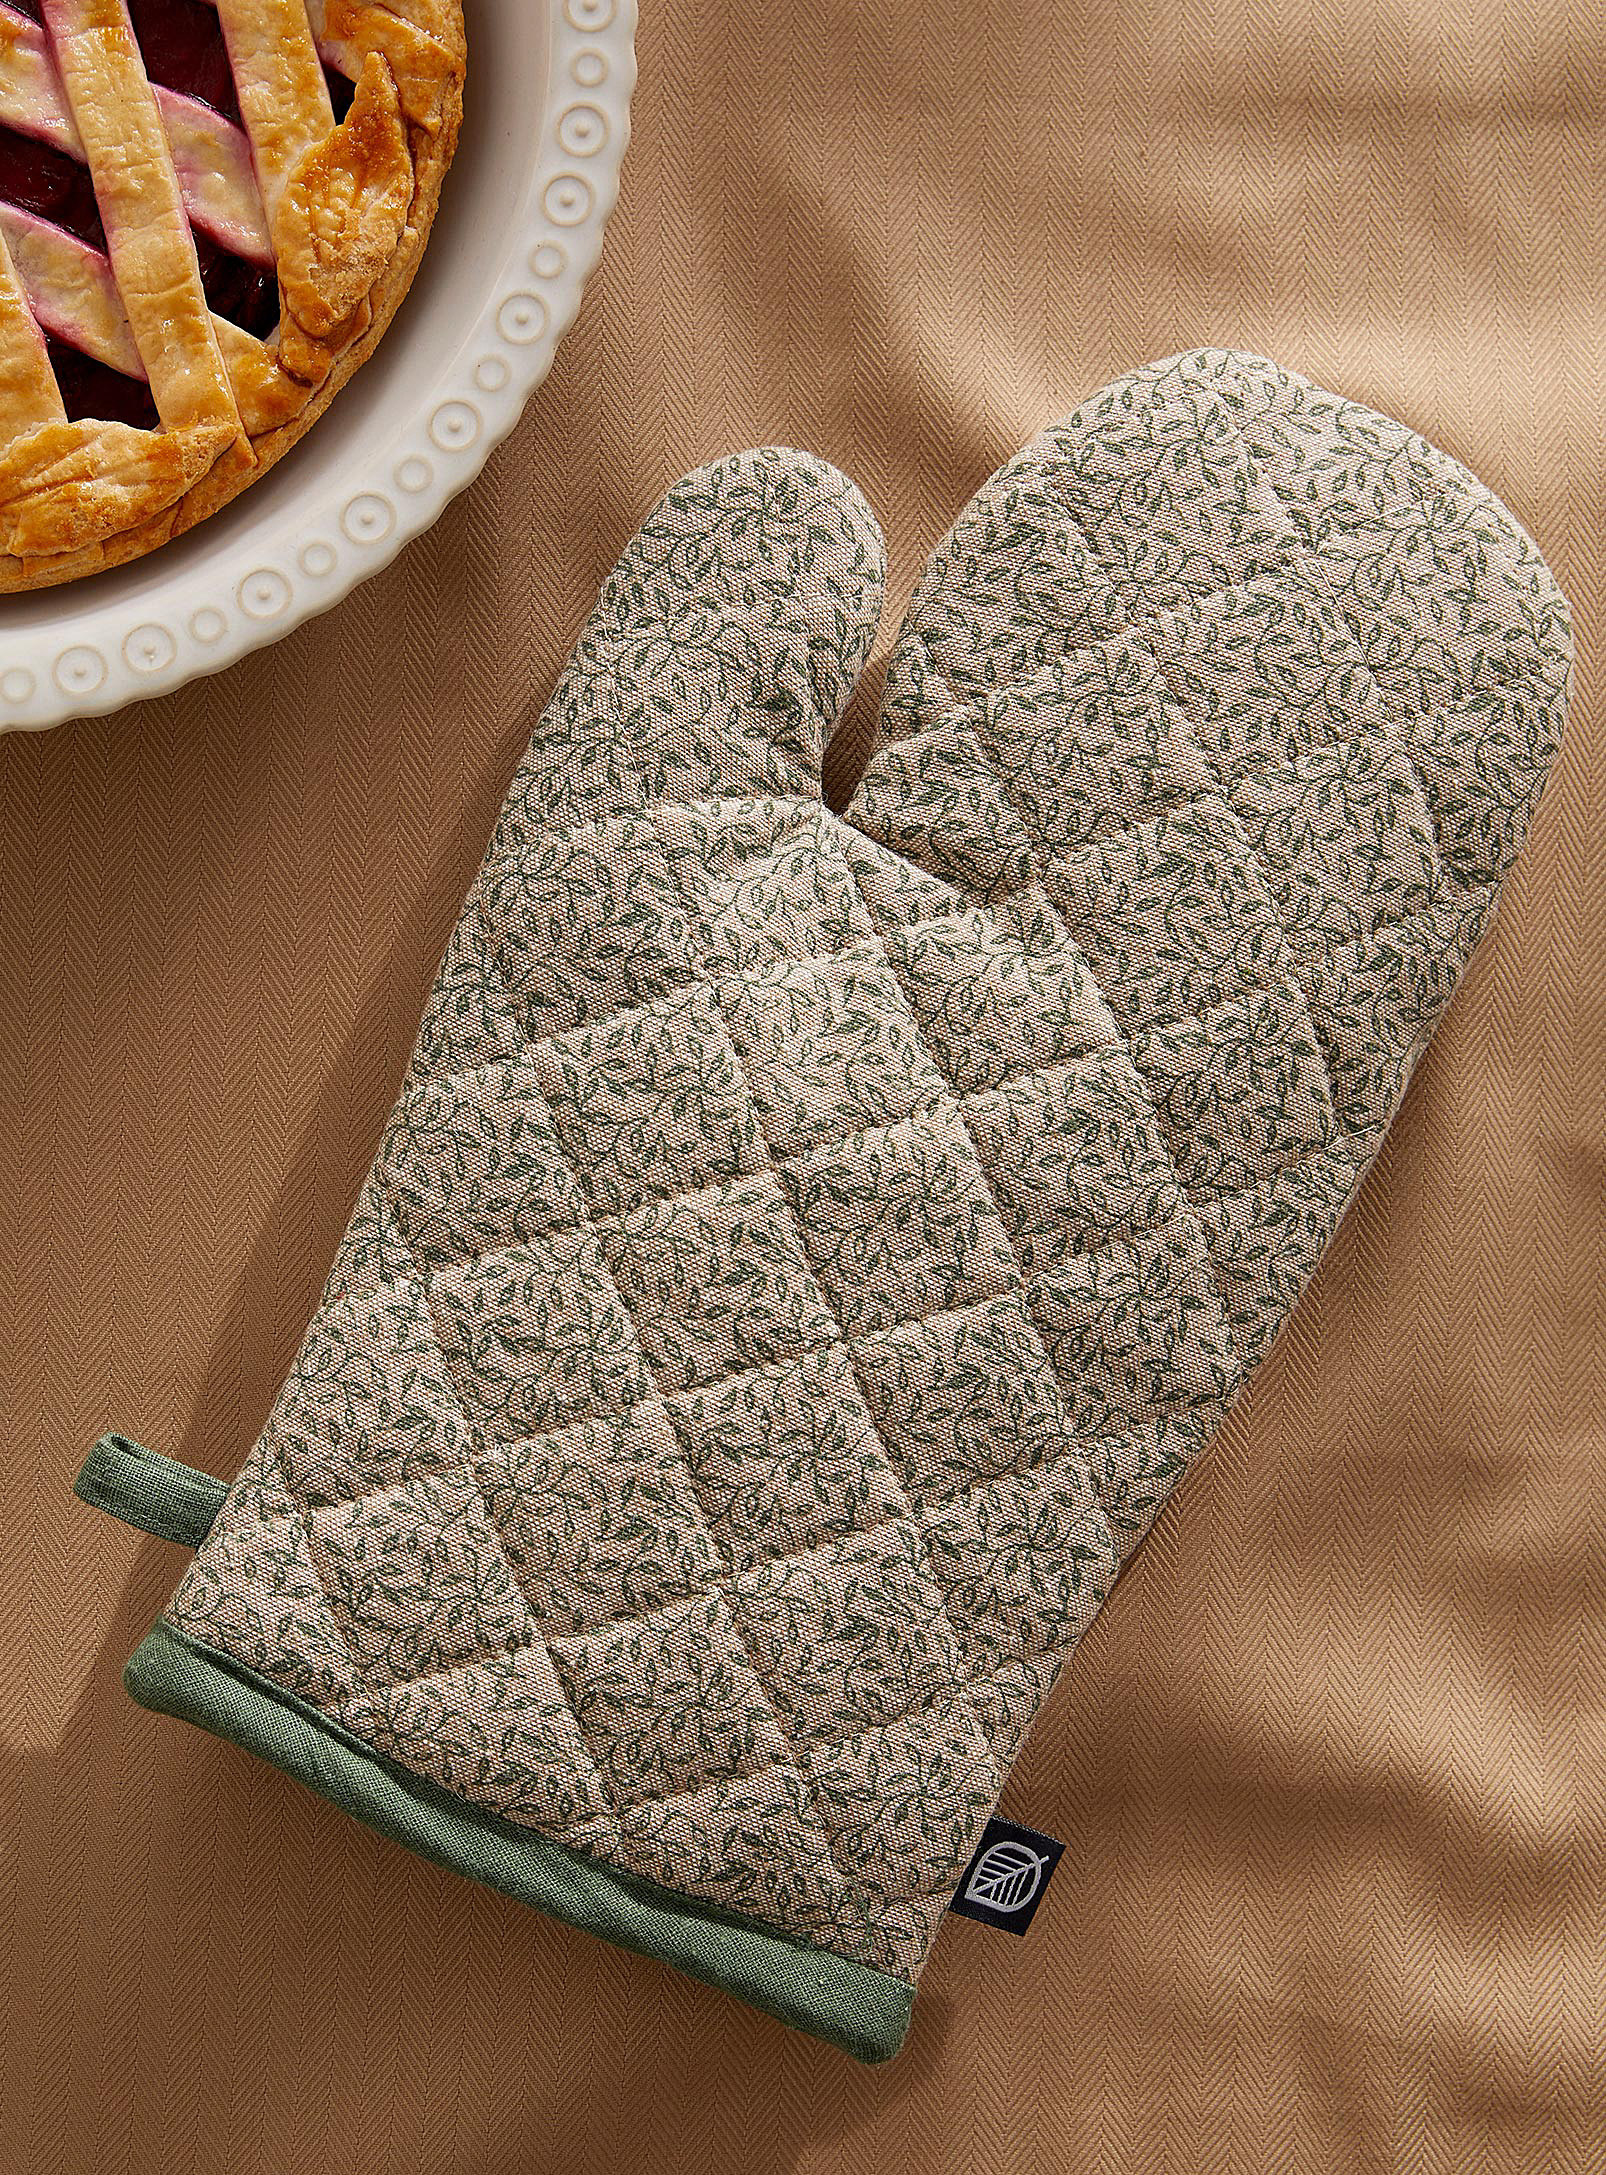 Simons Maison Contrasting Foliage Recycled Fibre Oven Mitt In Neutral